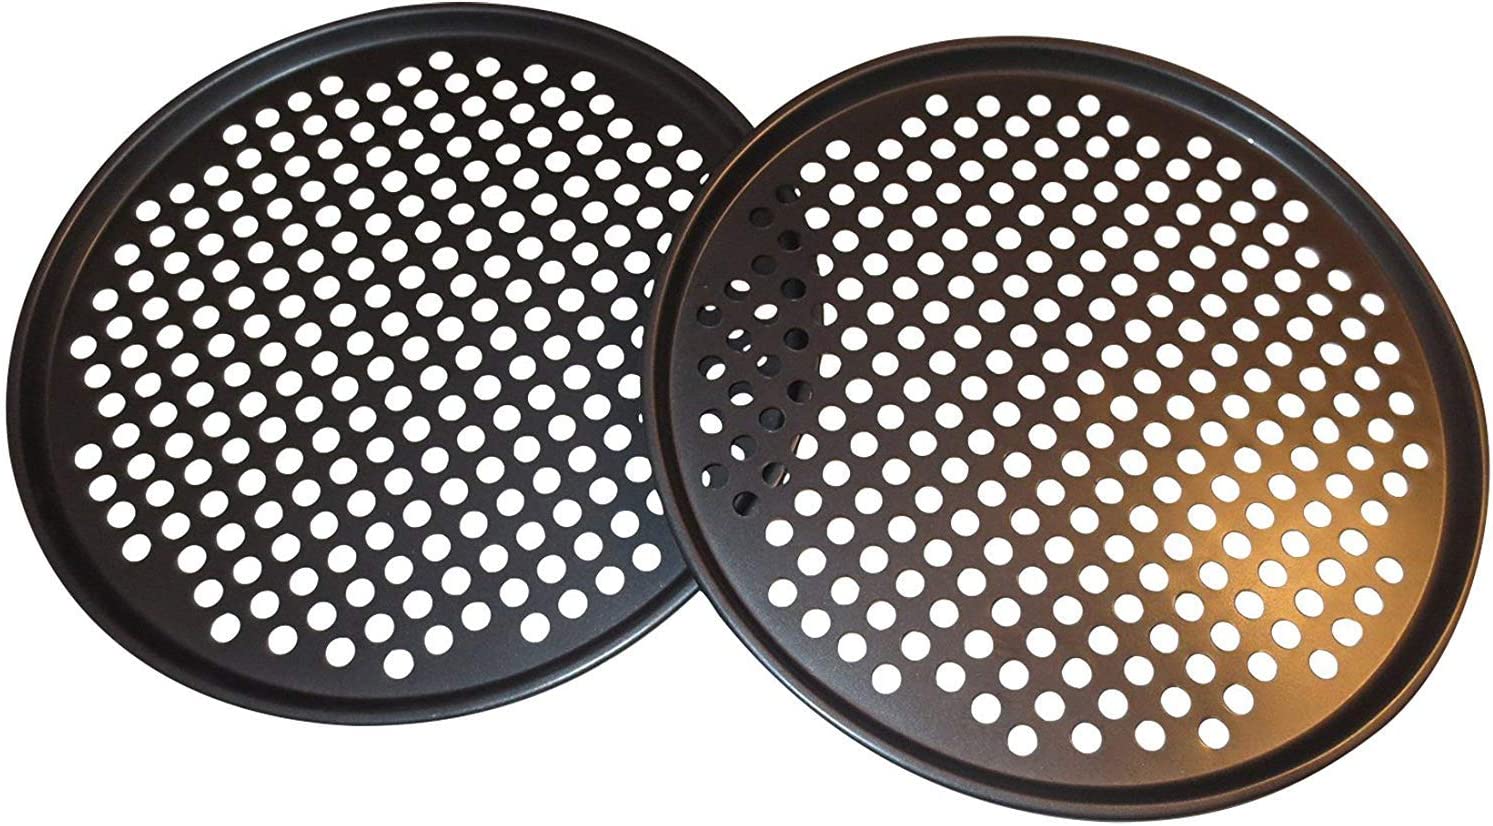 Maxi Nature Pizza Tray Set of 2 - Non-Stick Baking, Even Heat Distribution - Pizza Pan for the Oven - Perforated Stainless Steel for Crispy Crust - 13 Inches, 33 cm